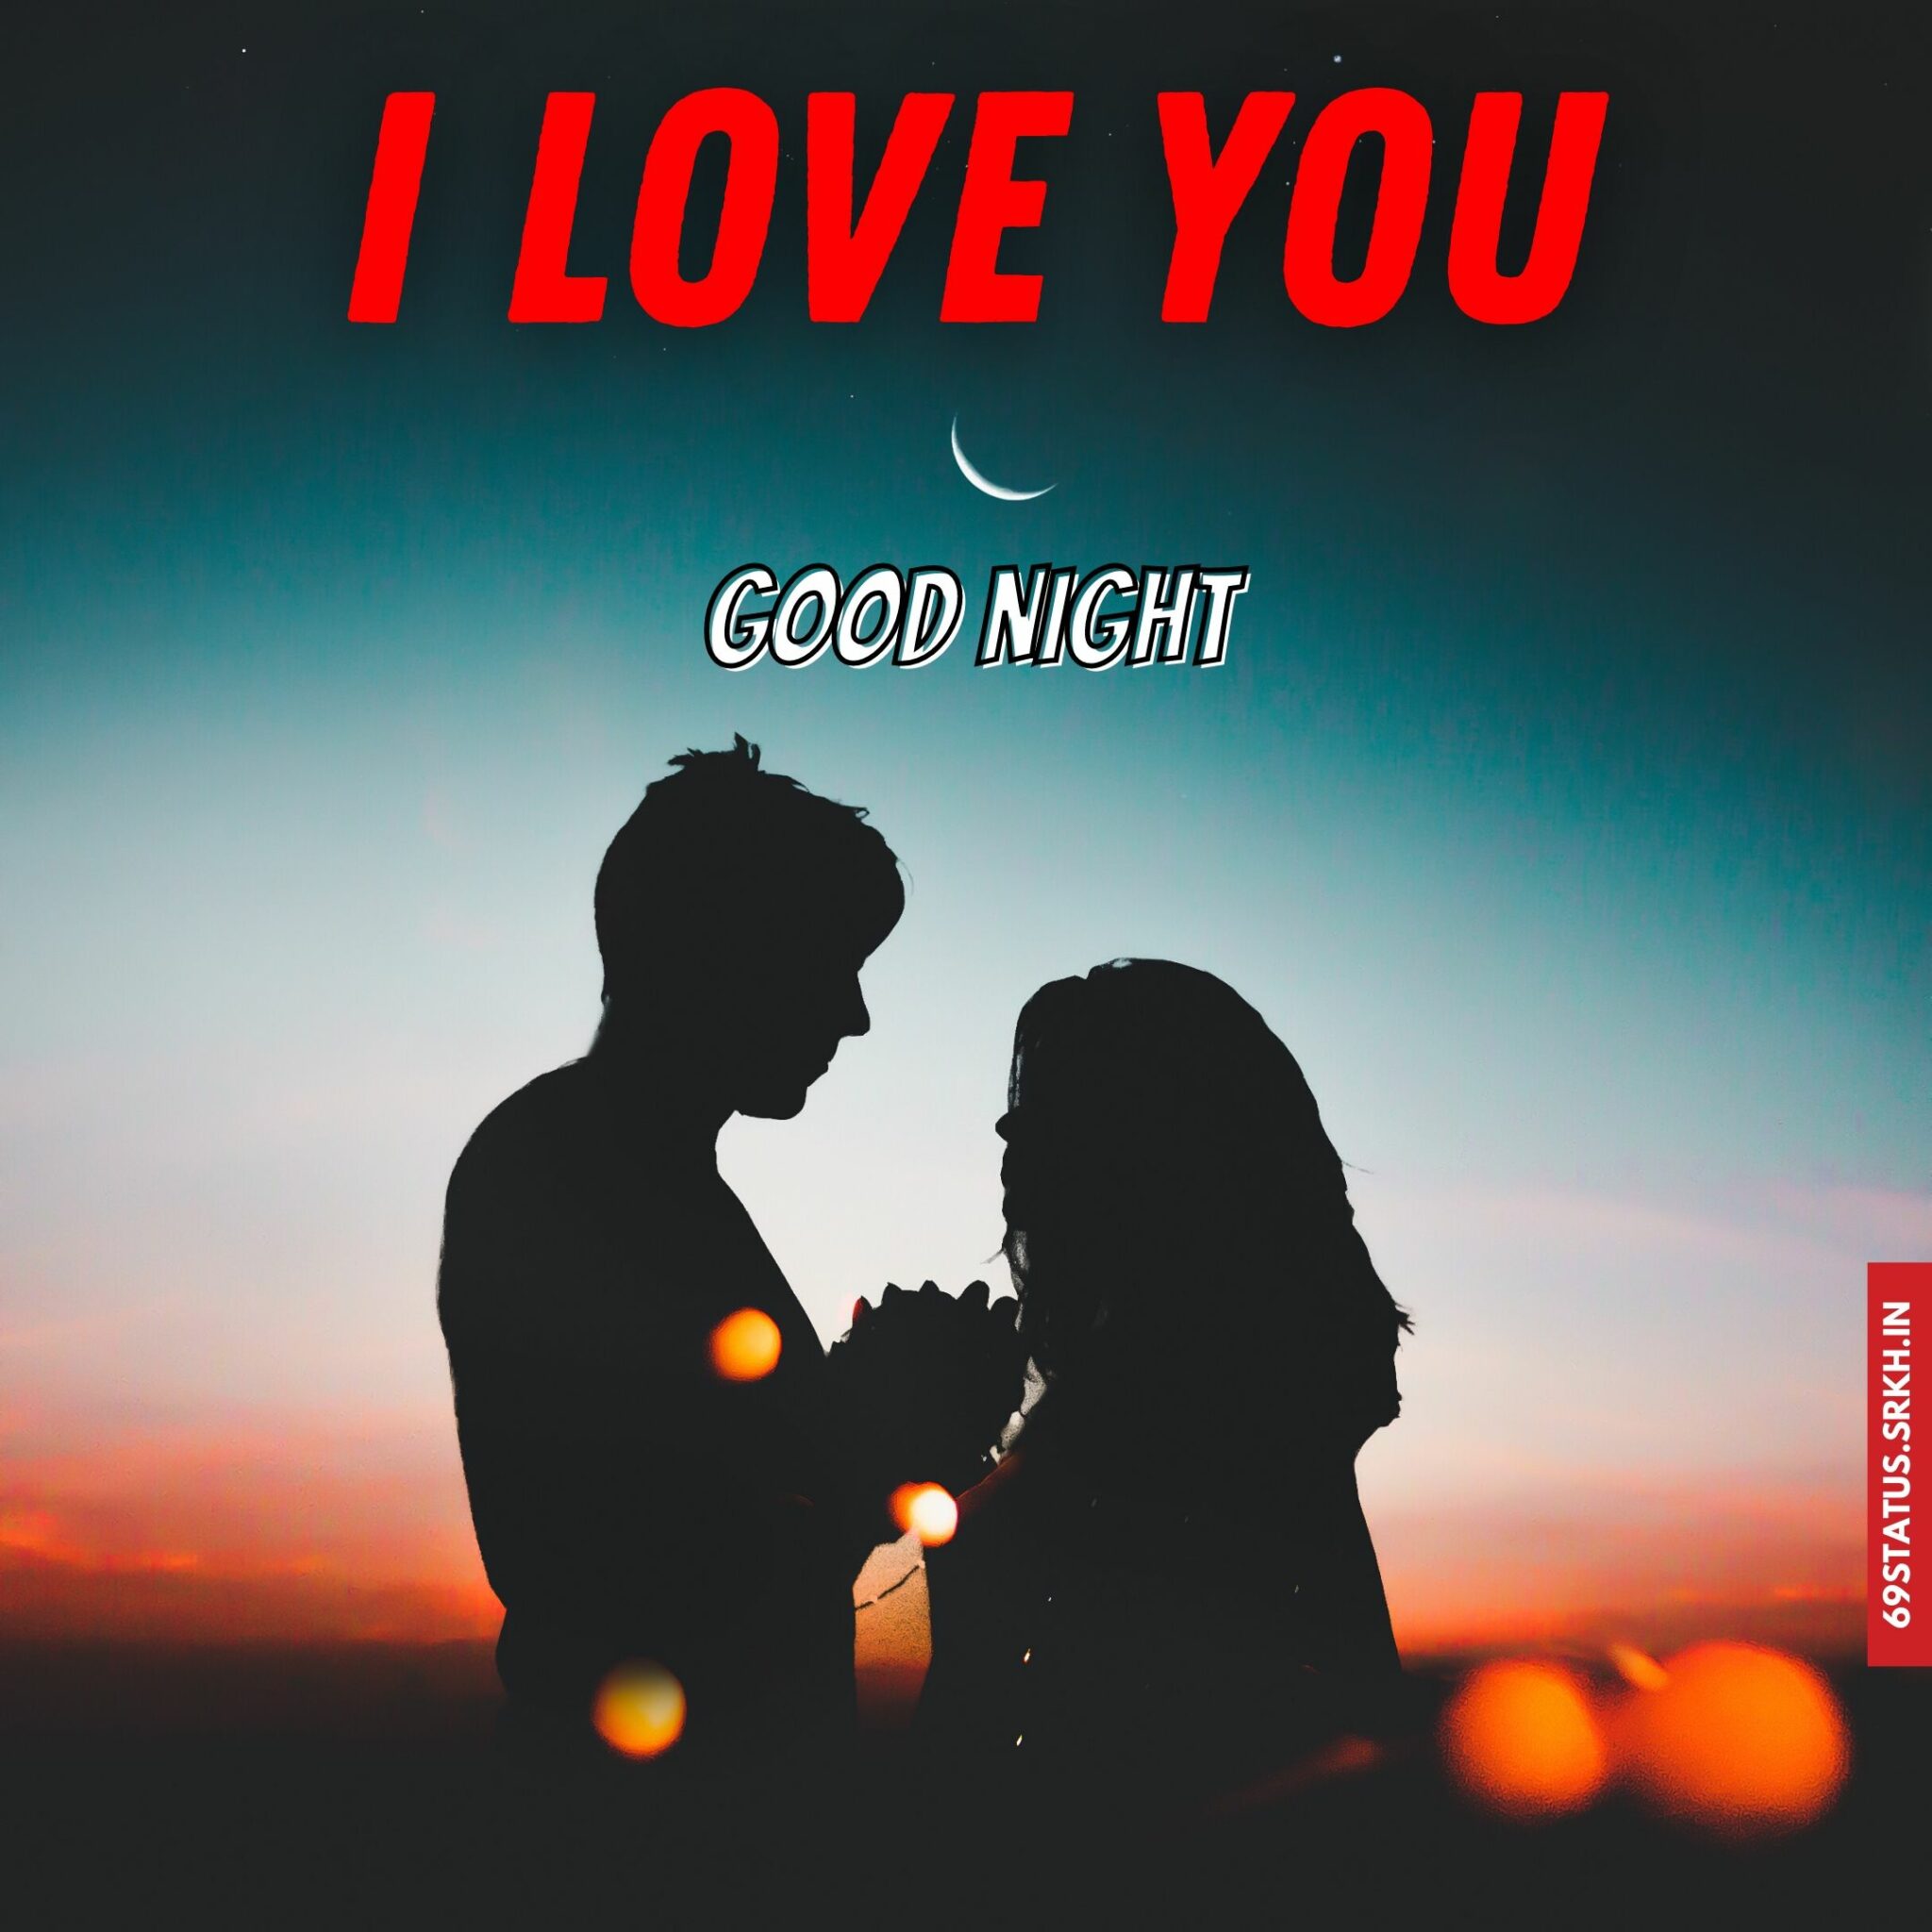 I Love You good night images